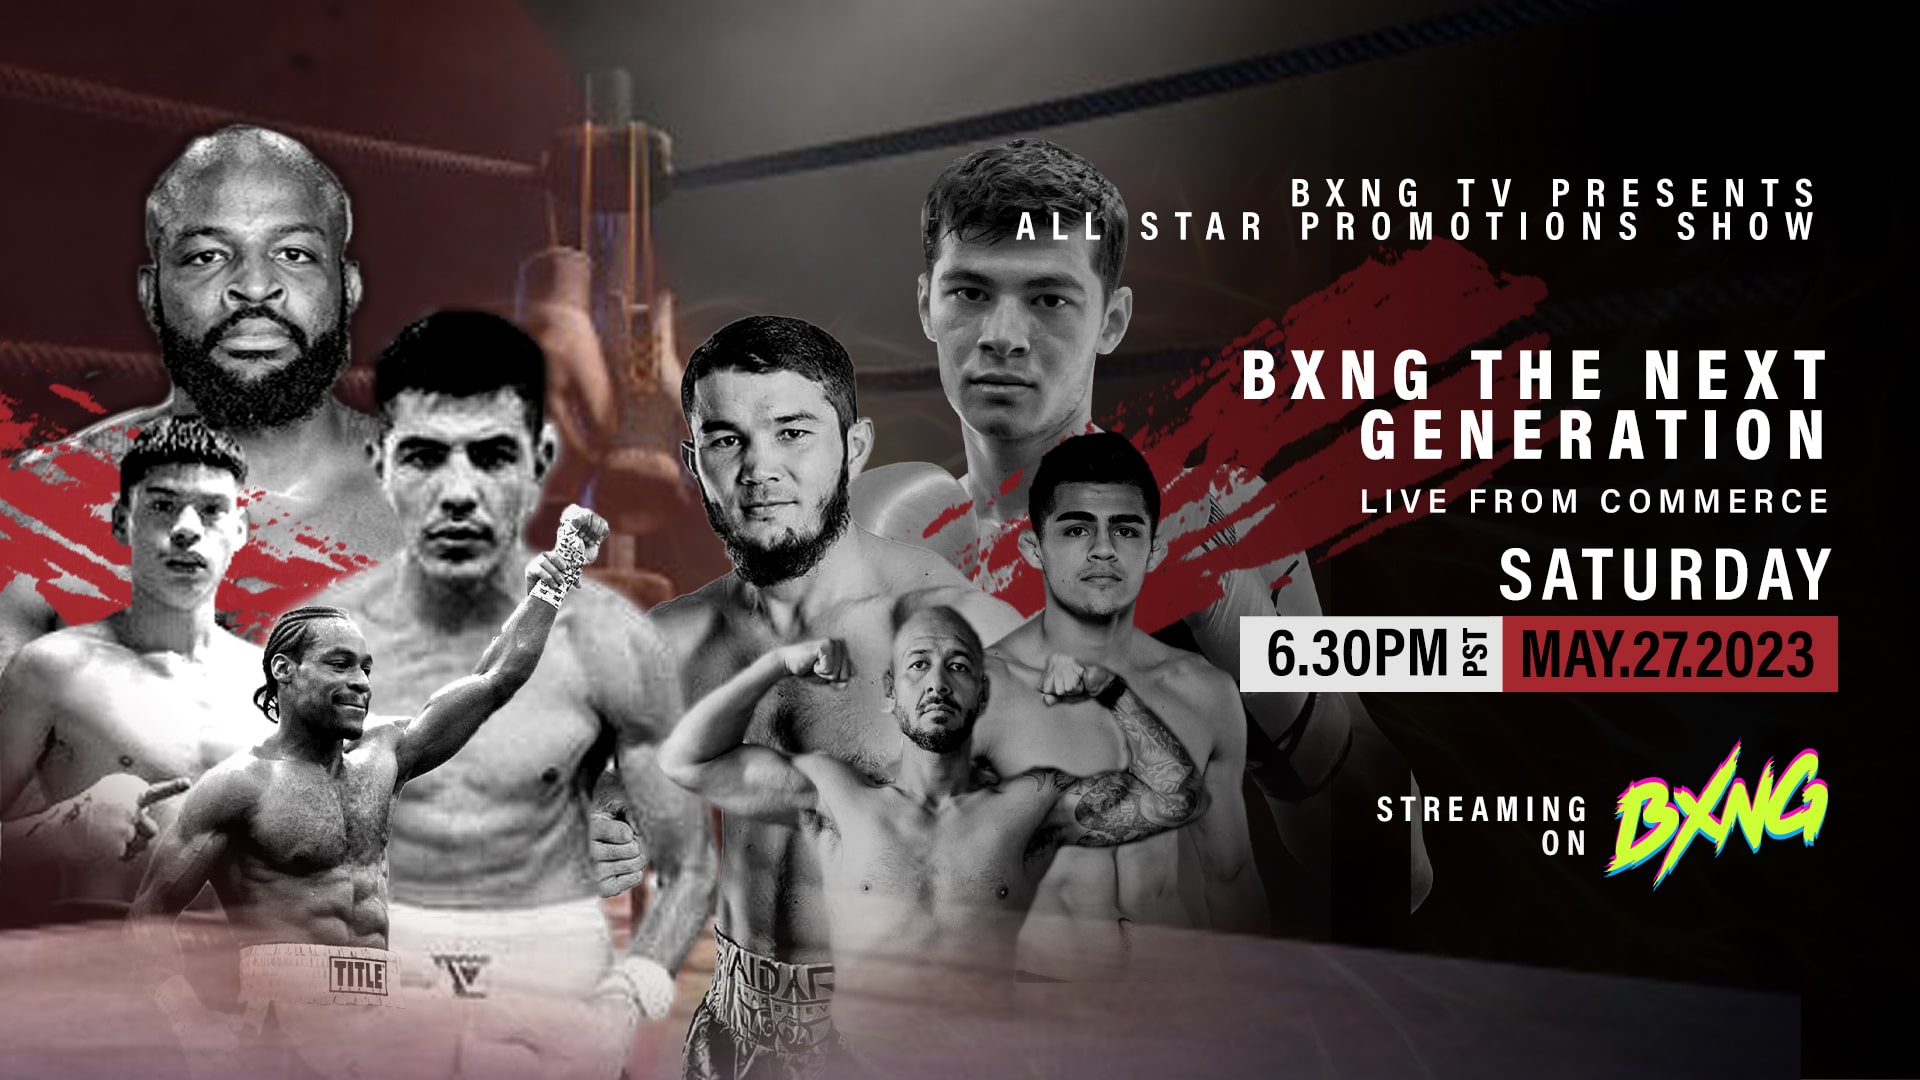 BXNG TV Presents All Star Promotions Show Live Stream 05/27/23